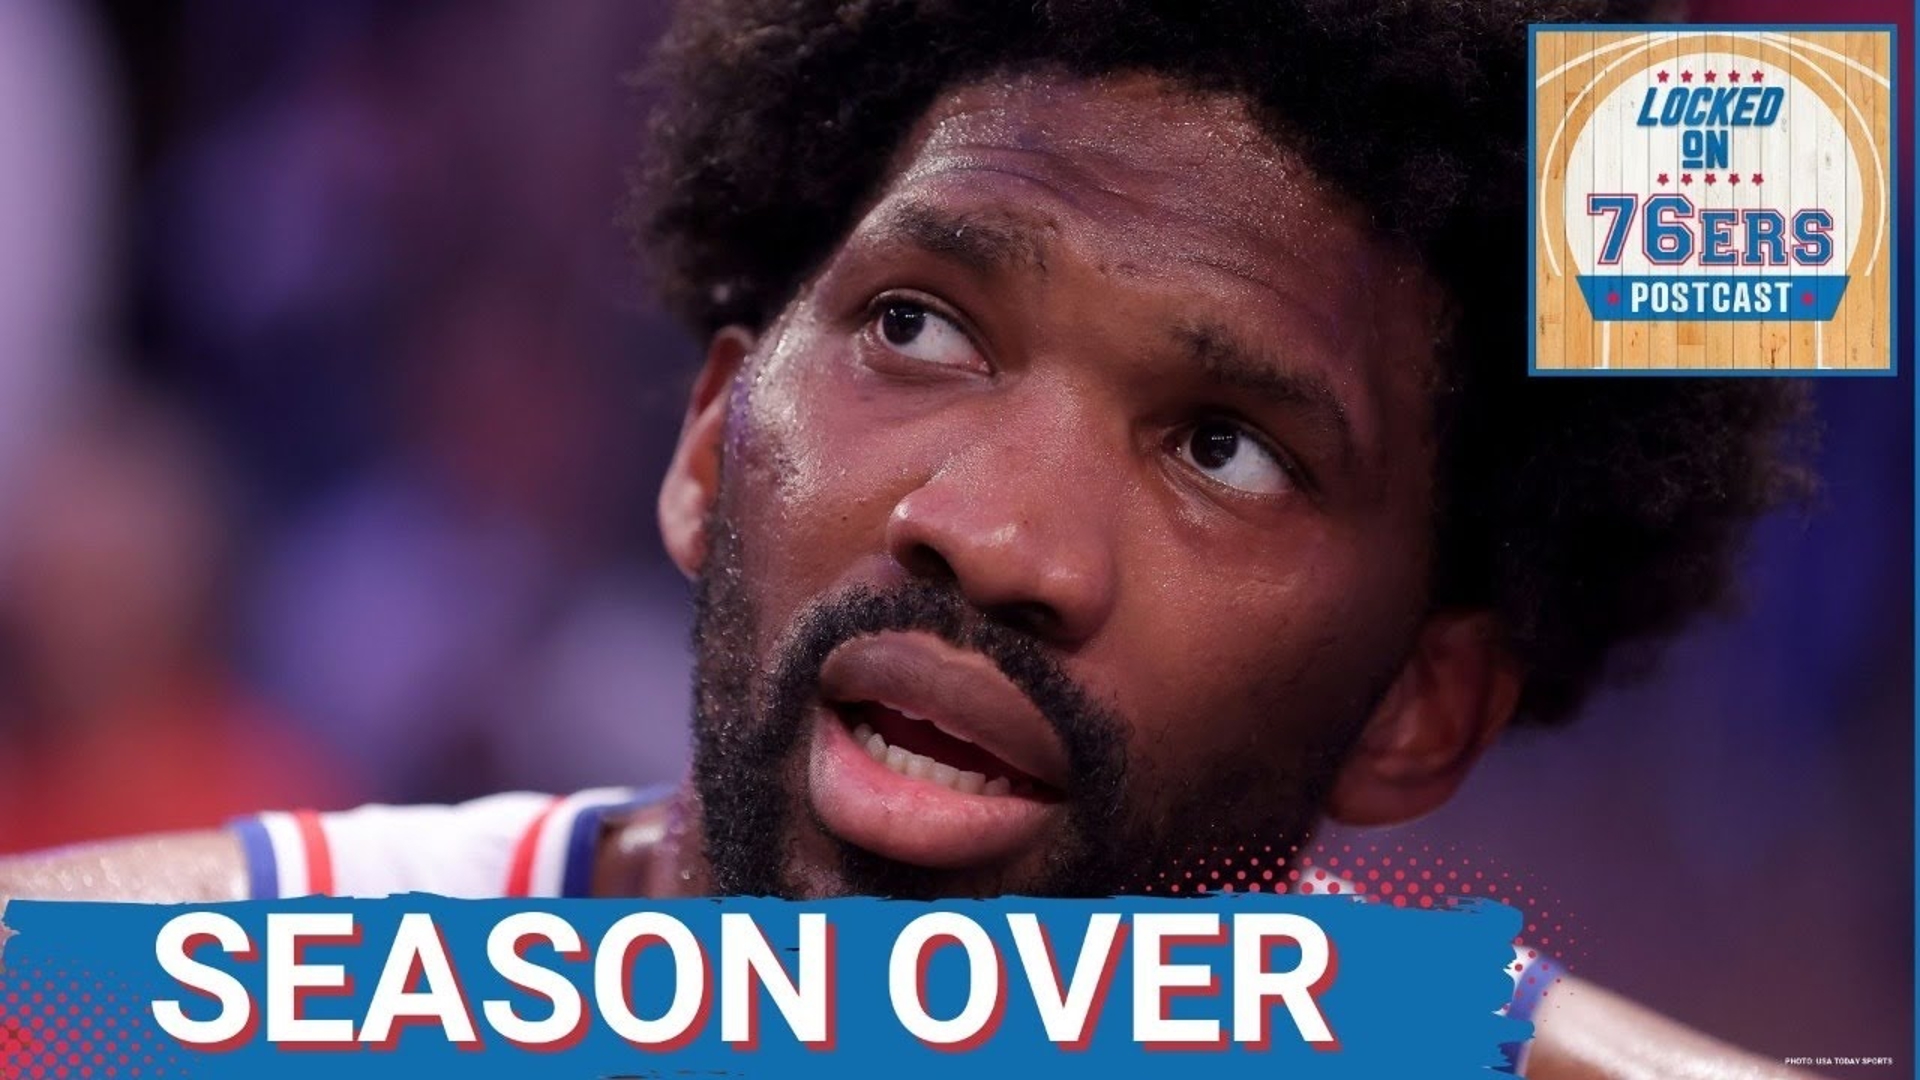 POSTCAST: The Philadelphia 76ers’s Season is OVER after 118-115 loss to the Knicks in Game 6!